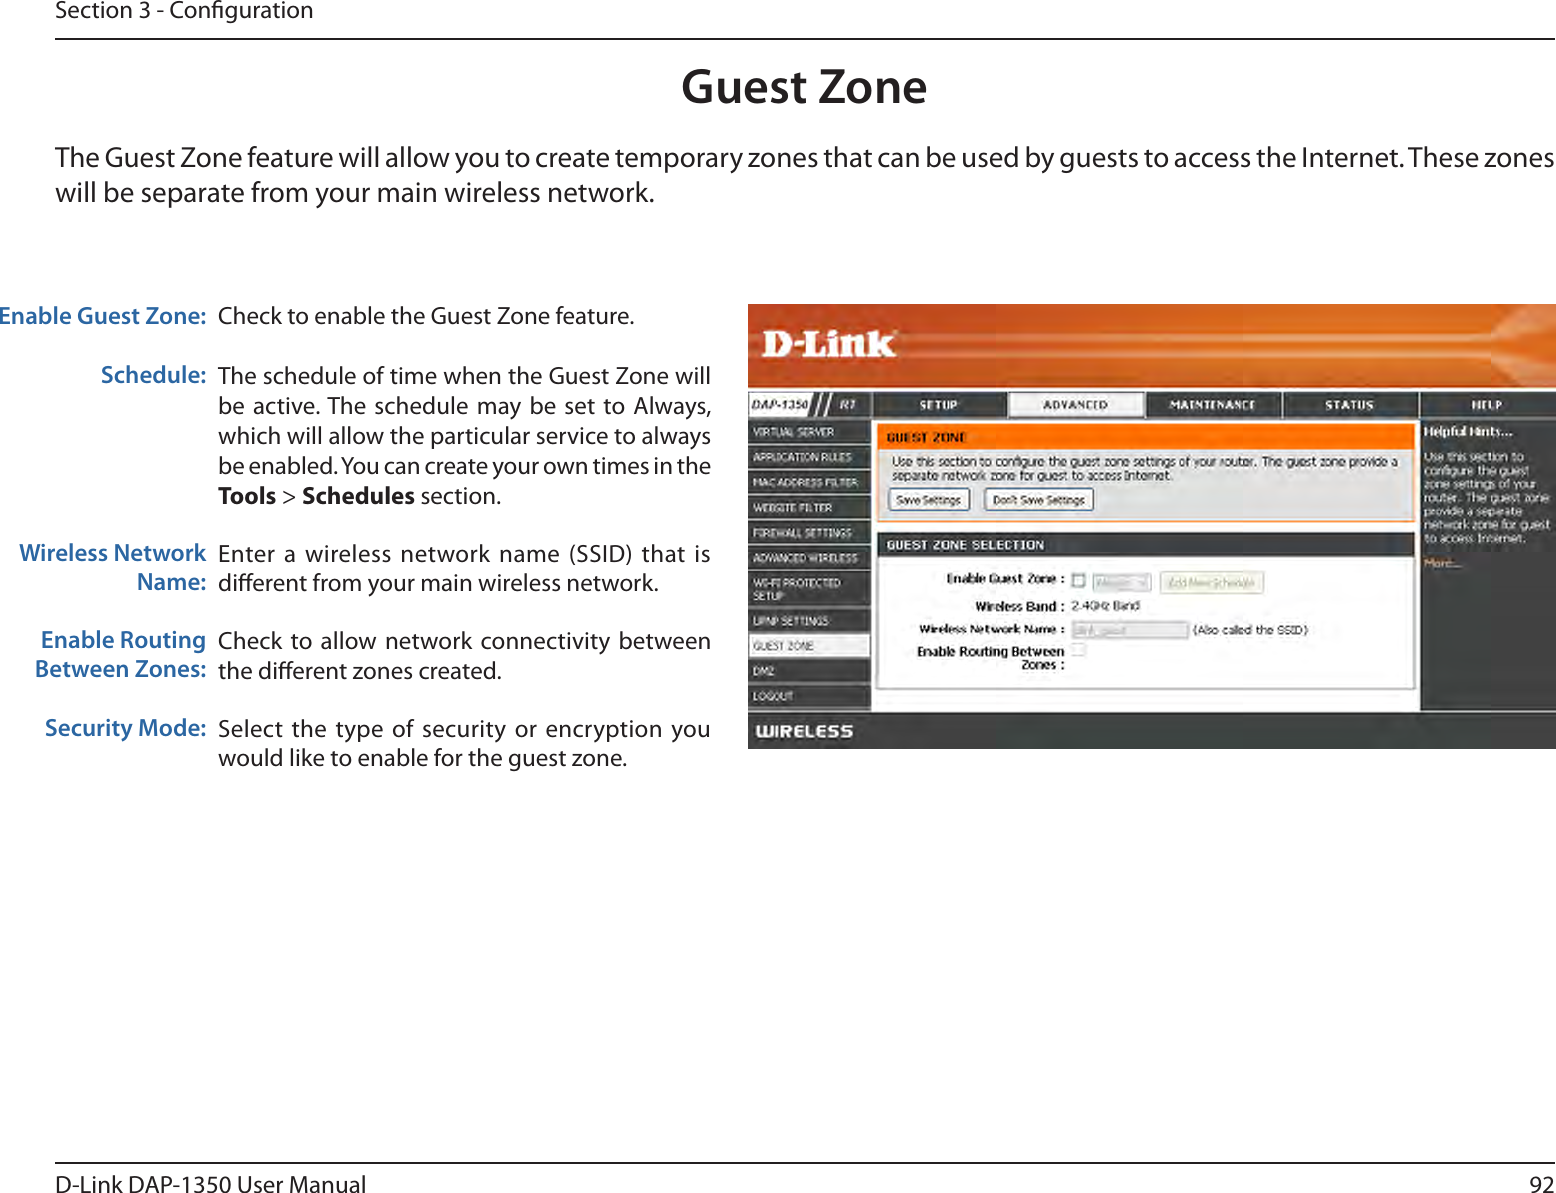 92D-Link DAP-1350 User ManualSection 3 - CongurationGuest ZoneCheck to enable the Guest Zone feature. The schedule of time when the Guest Zone will be active. The schedule  may be set to Always, which will allow the particular service to always be enabled. You can create your own times in the Tools &gt; Schedules section.Enter a wireless network name (SSID) that  is dierent from your main wireless network.Check to allow network connectivity between the dierent zones created. Select  the type of  security or encryption  you would like to enable for the guest zone.  Enable Guest Zone:Schedule:Wireless Network Name:Enable Routing Between Zones:Security Mode:The Guest Zone feature will allow you to create temporary zones that can be used by guests to access the Internet. These zones will be separate from your main wireless network. 